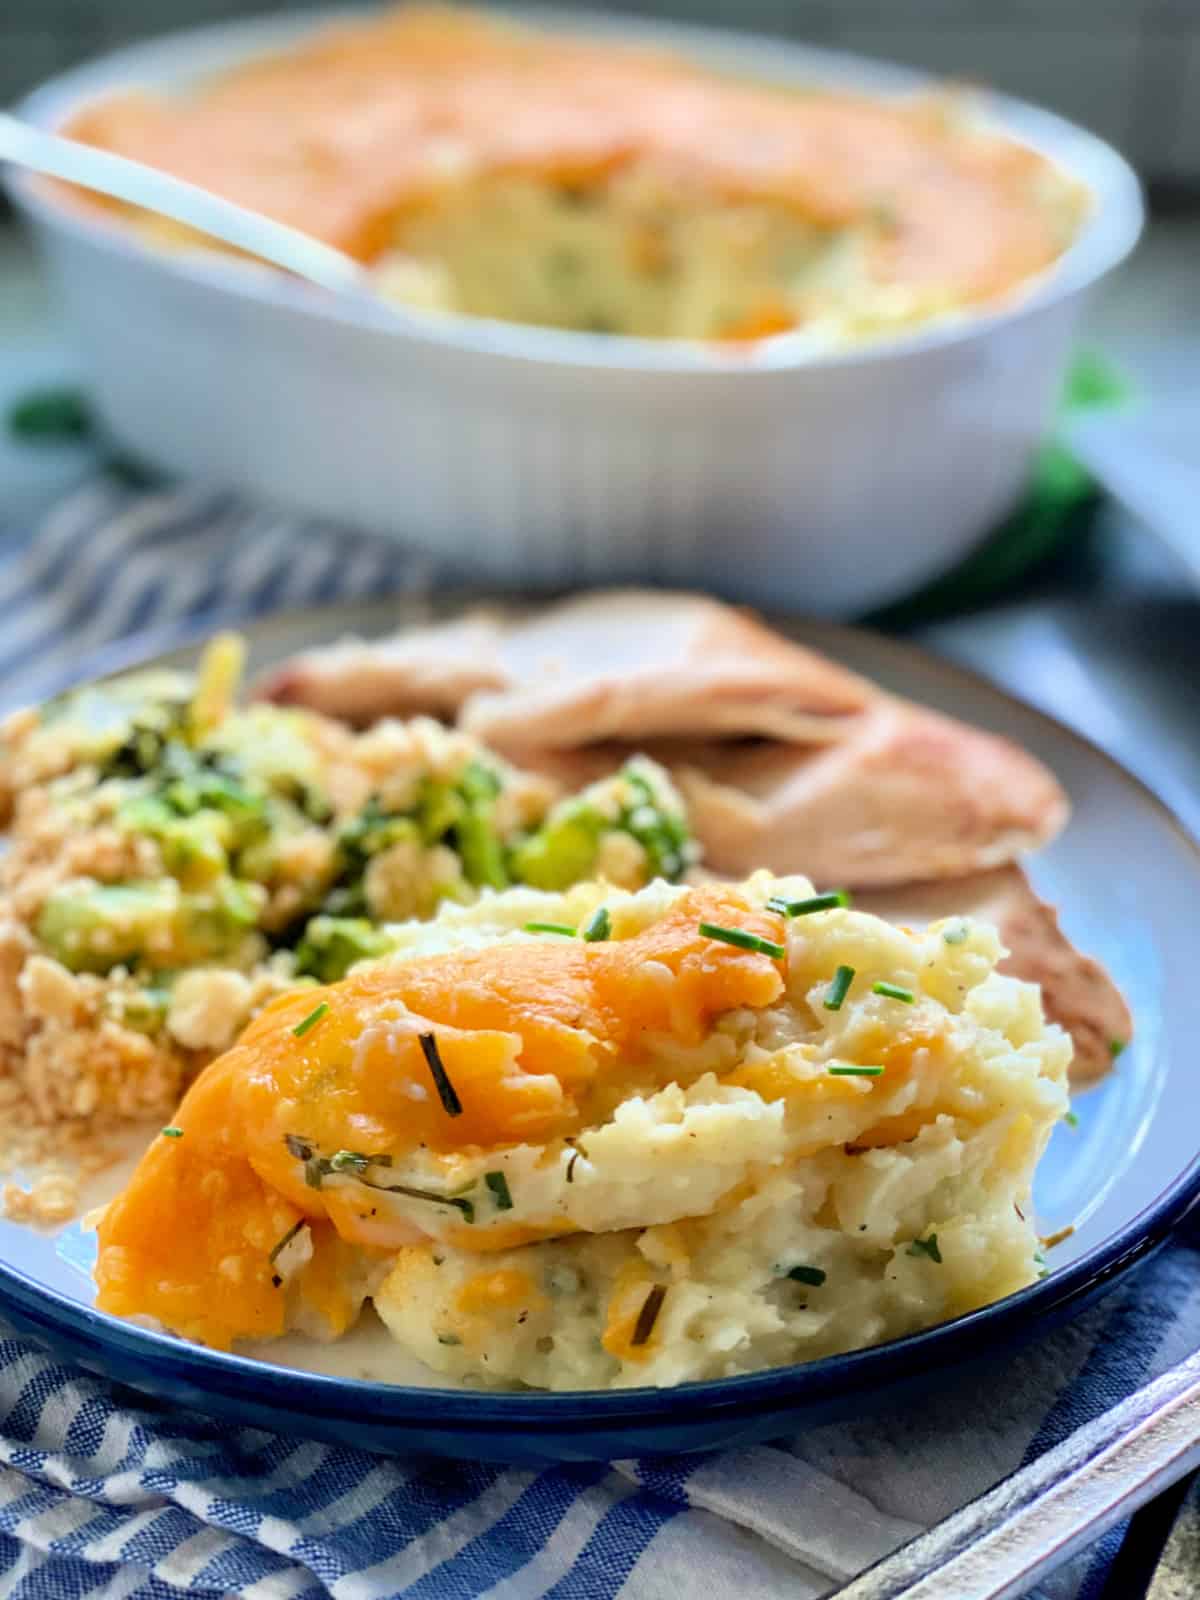 Plate full of Baked Cheddar and Chive Mashed Potatoes with turkey and broccoli casserole on it.